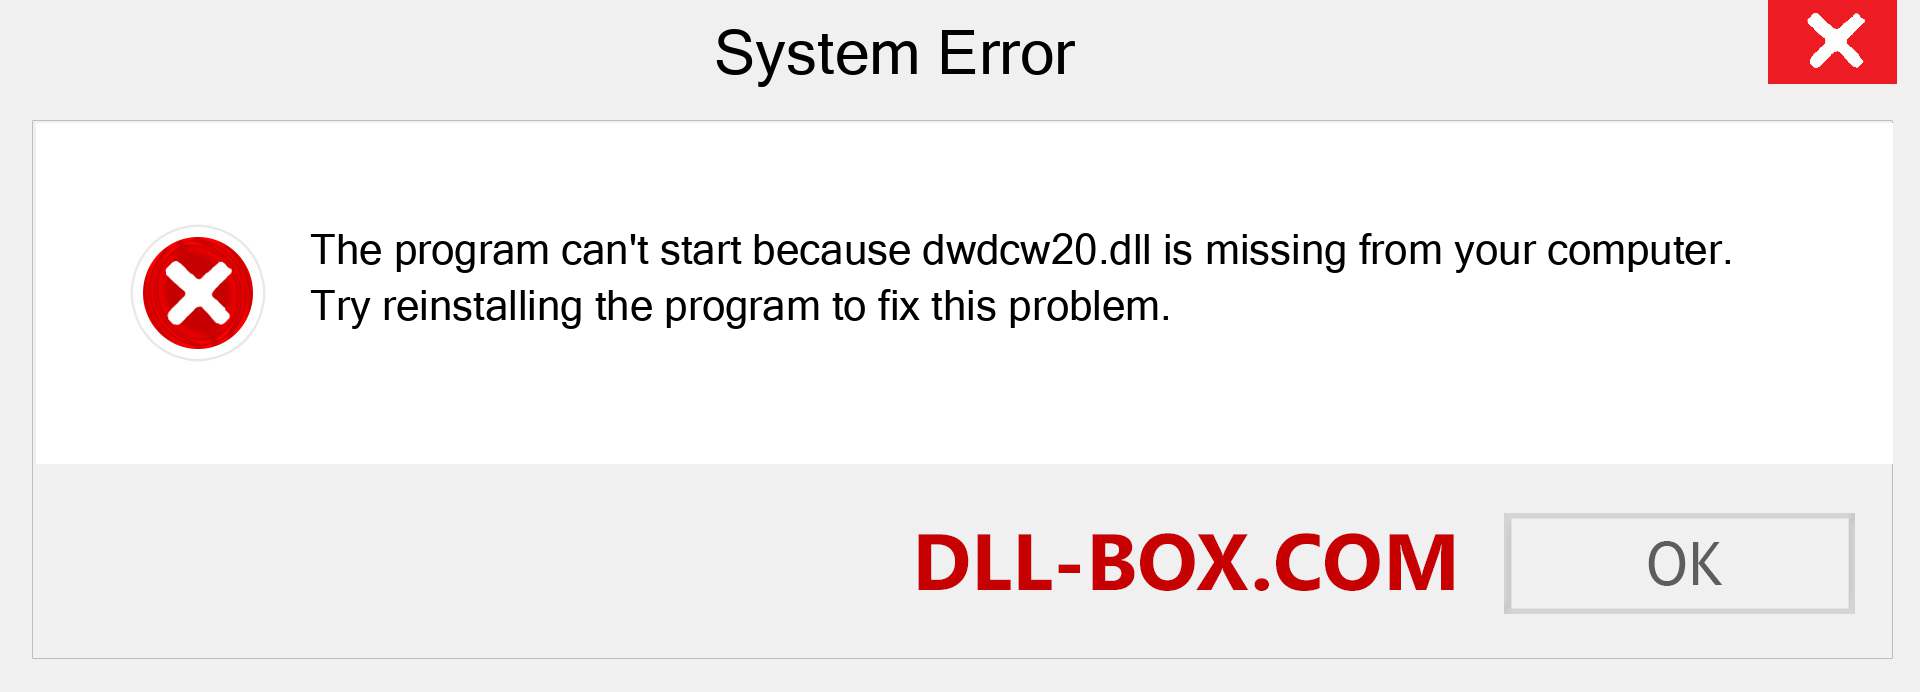  dwdcw20.dll file is missing?. Download for Windows 7, 8, 10 - Fix  dwdcw20 dll Missing Error on Windows, photos, images